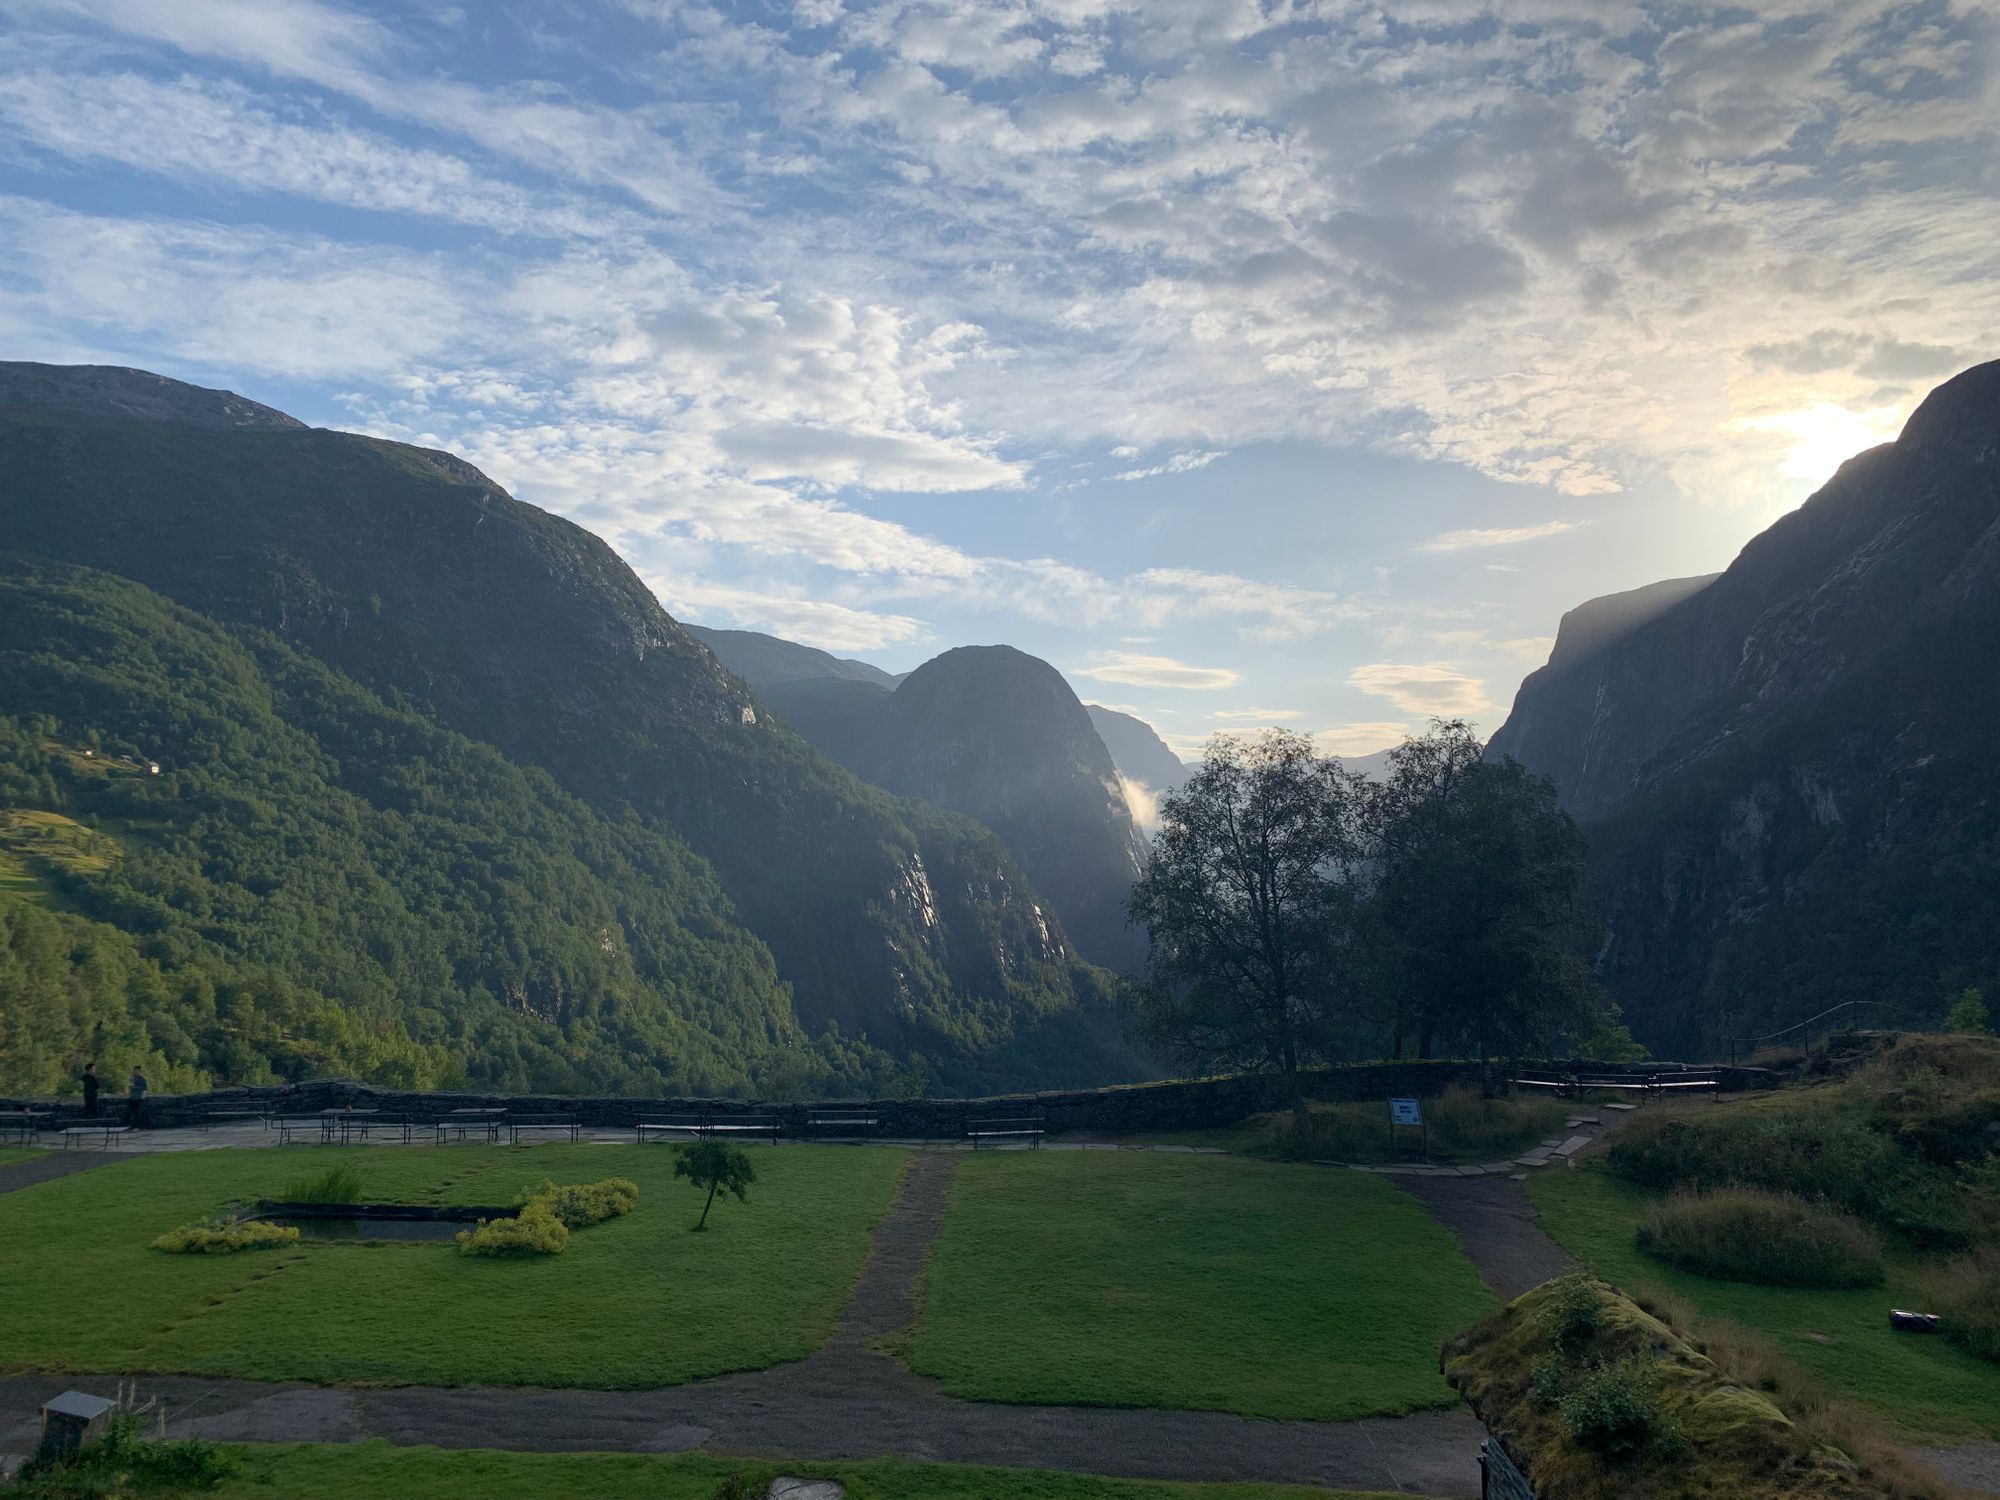 Sunlight breaking over the fjords of Norway.